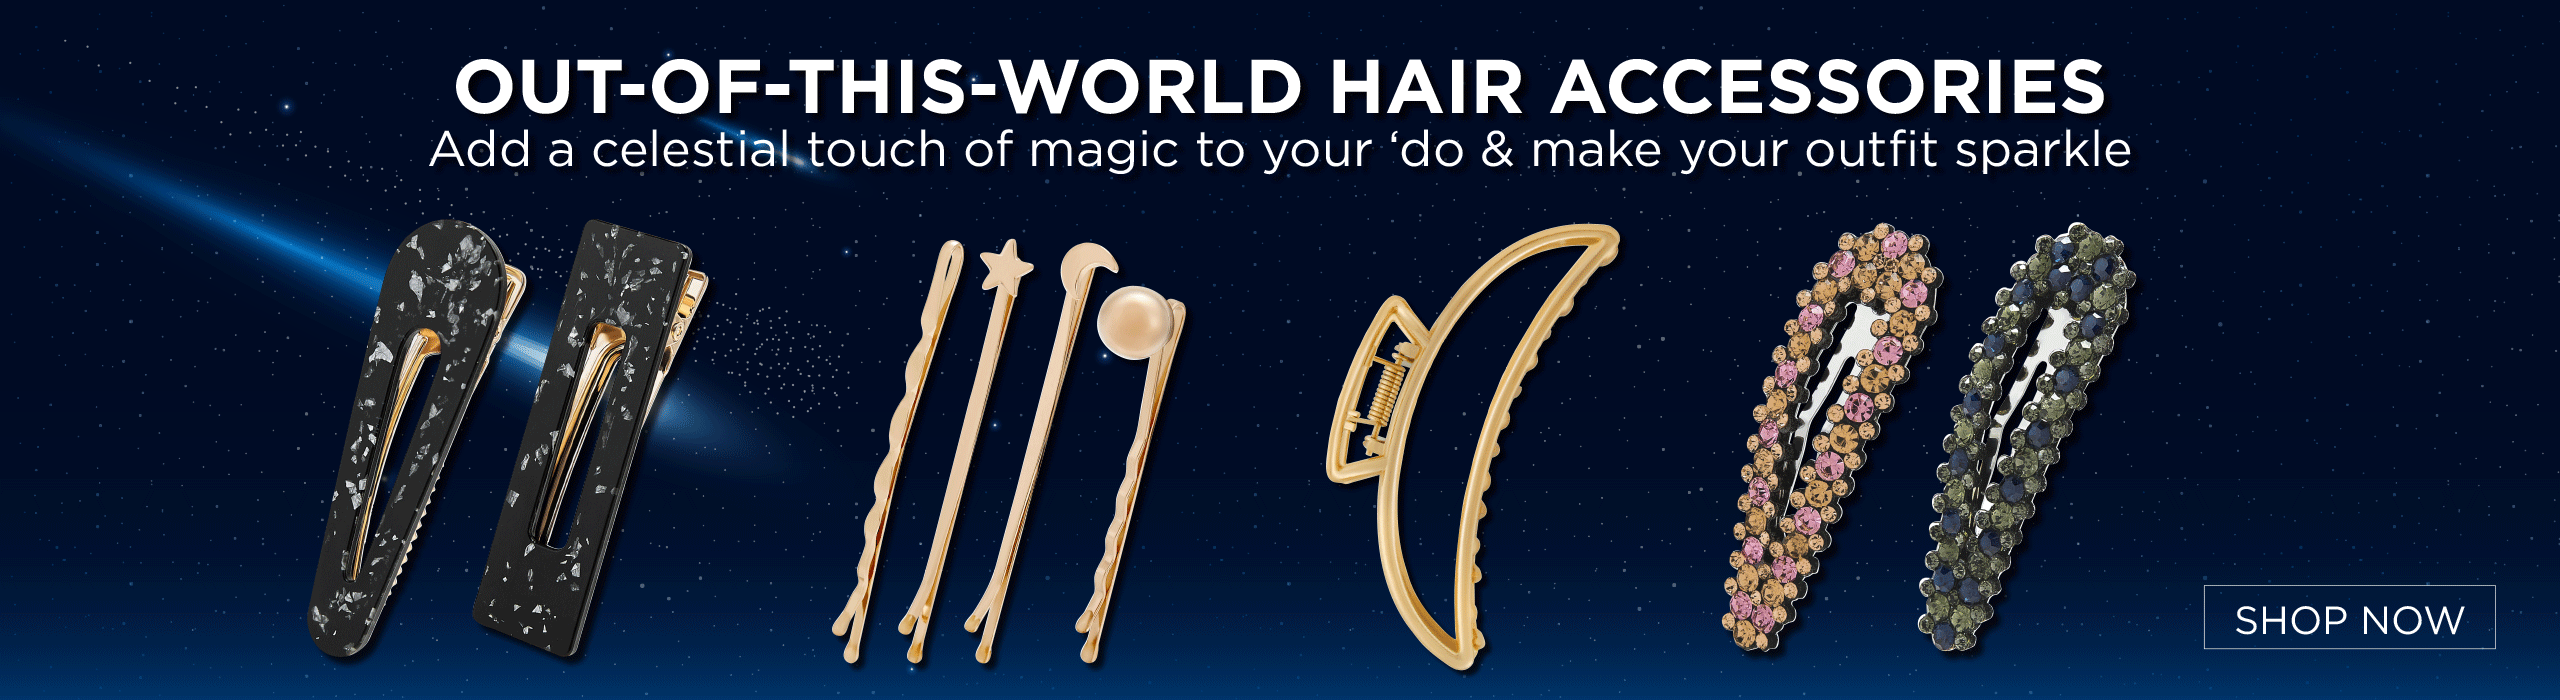 Out of this world hair accessories